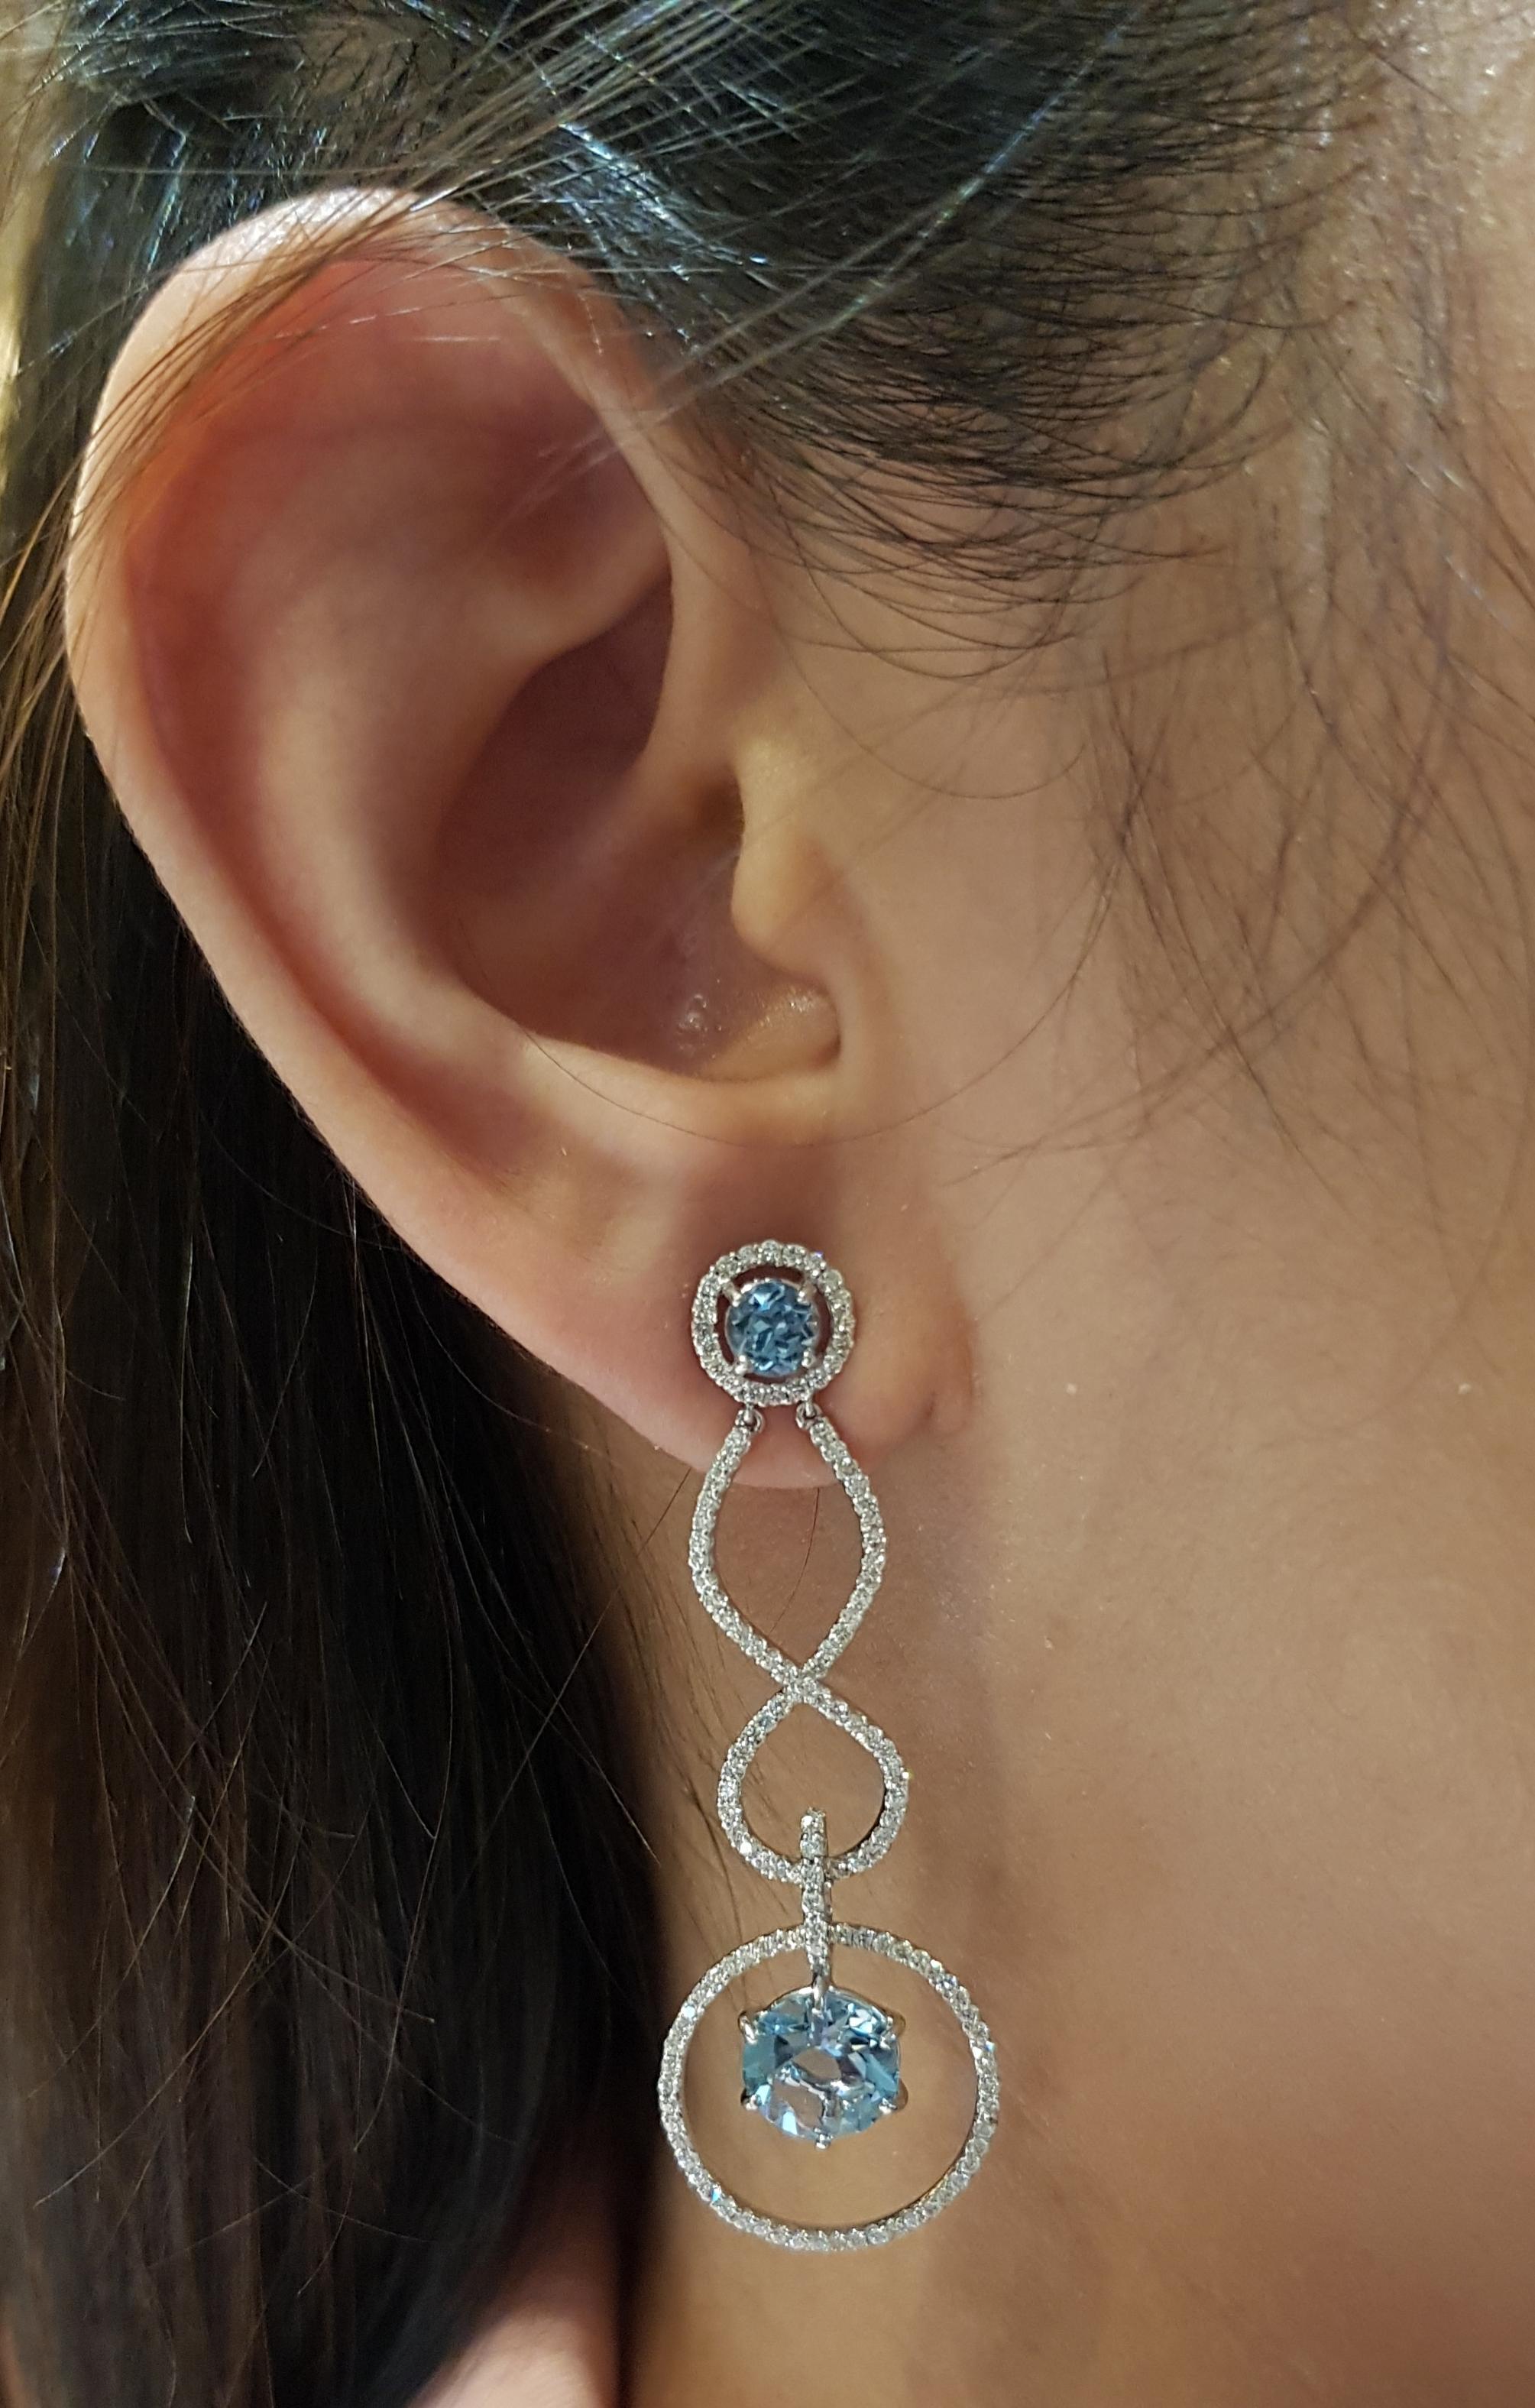 Aquamarine 3.82 carats with Diamond 1.17 carats Earrings set in 18 Karat White Gold Settings

Width:  1.7 cm 
Length:  5.0 cm
Total Weight: 8.74 grams

